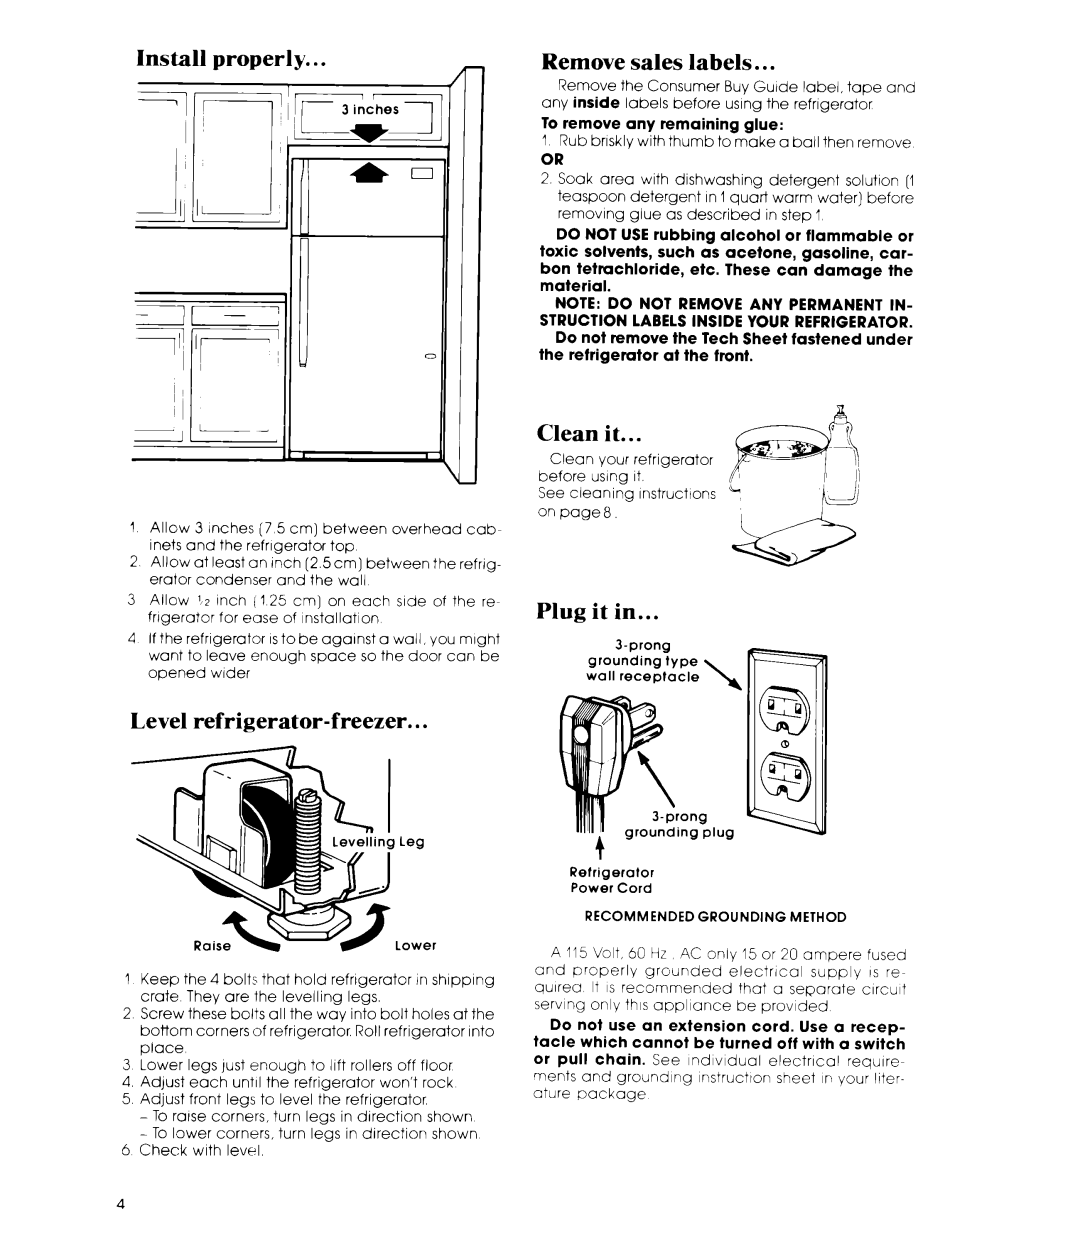 Whirlpool ET14AK manual Install properly I lrl, Remove sales labels, Clean, Plug it in, Level refrigerator-freezer 